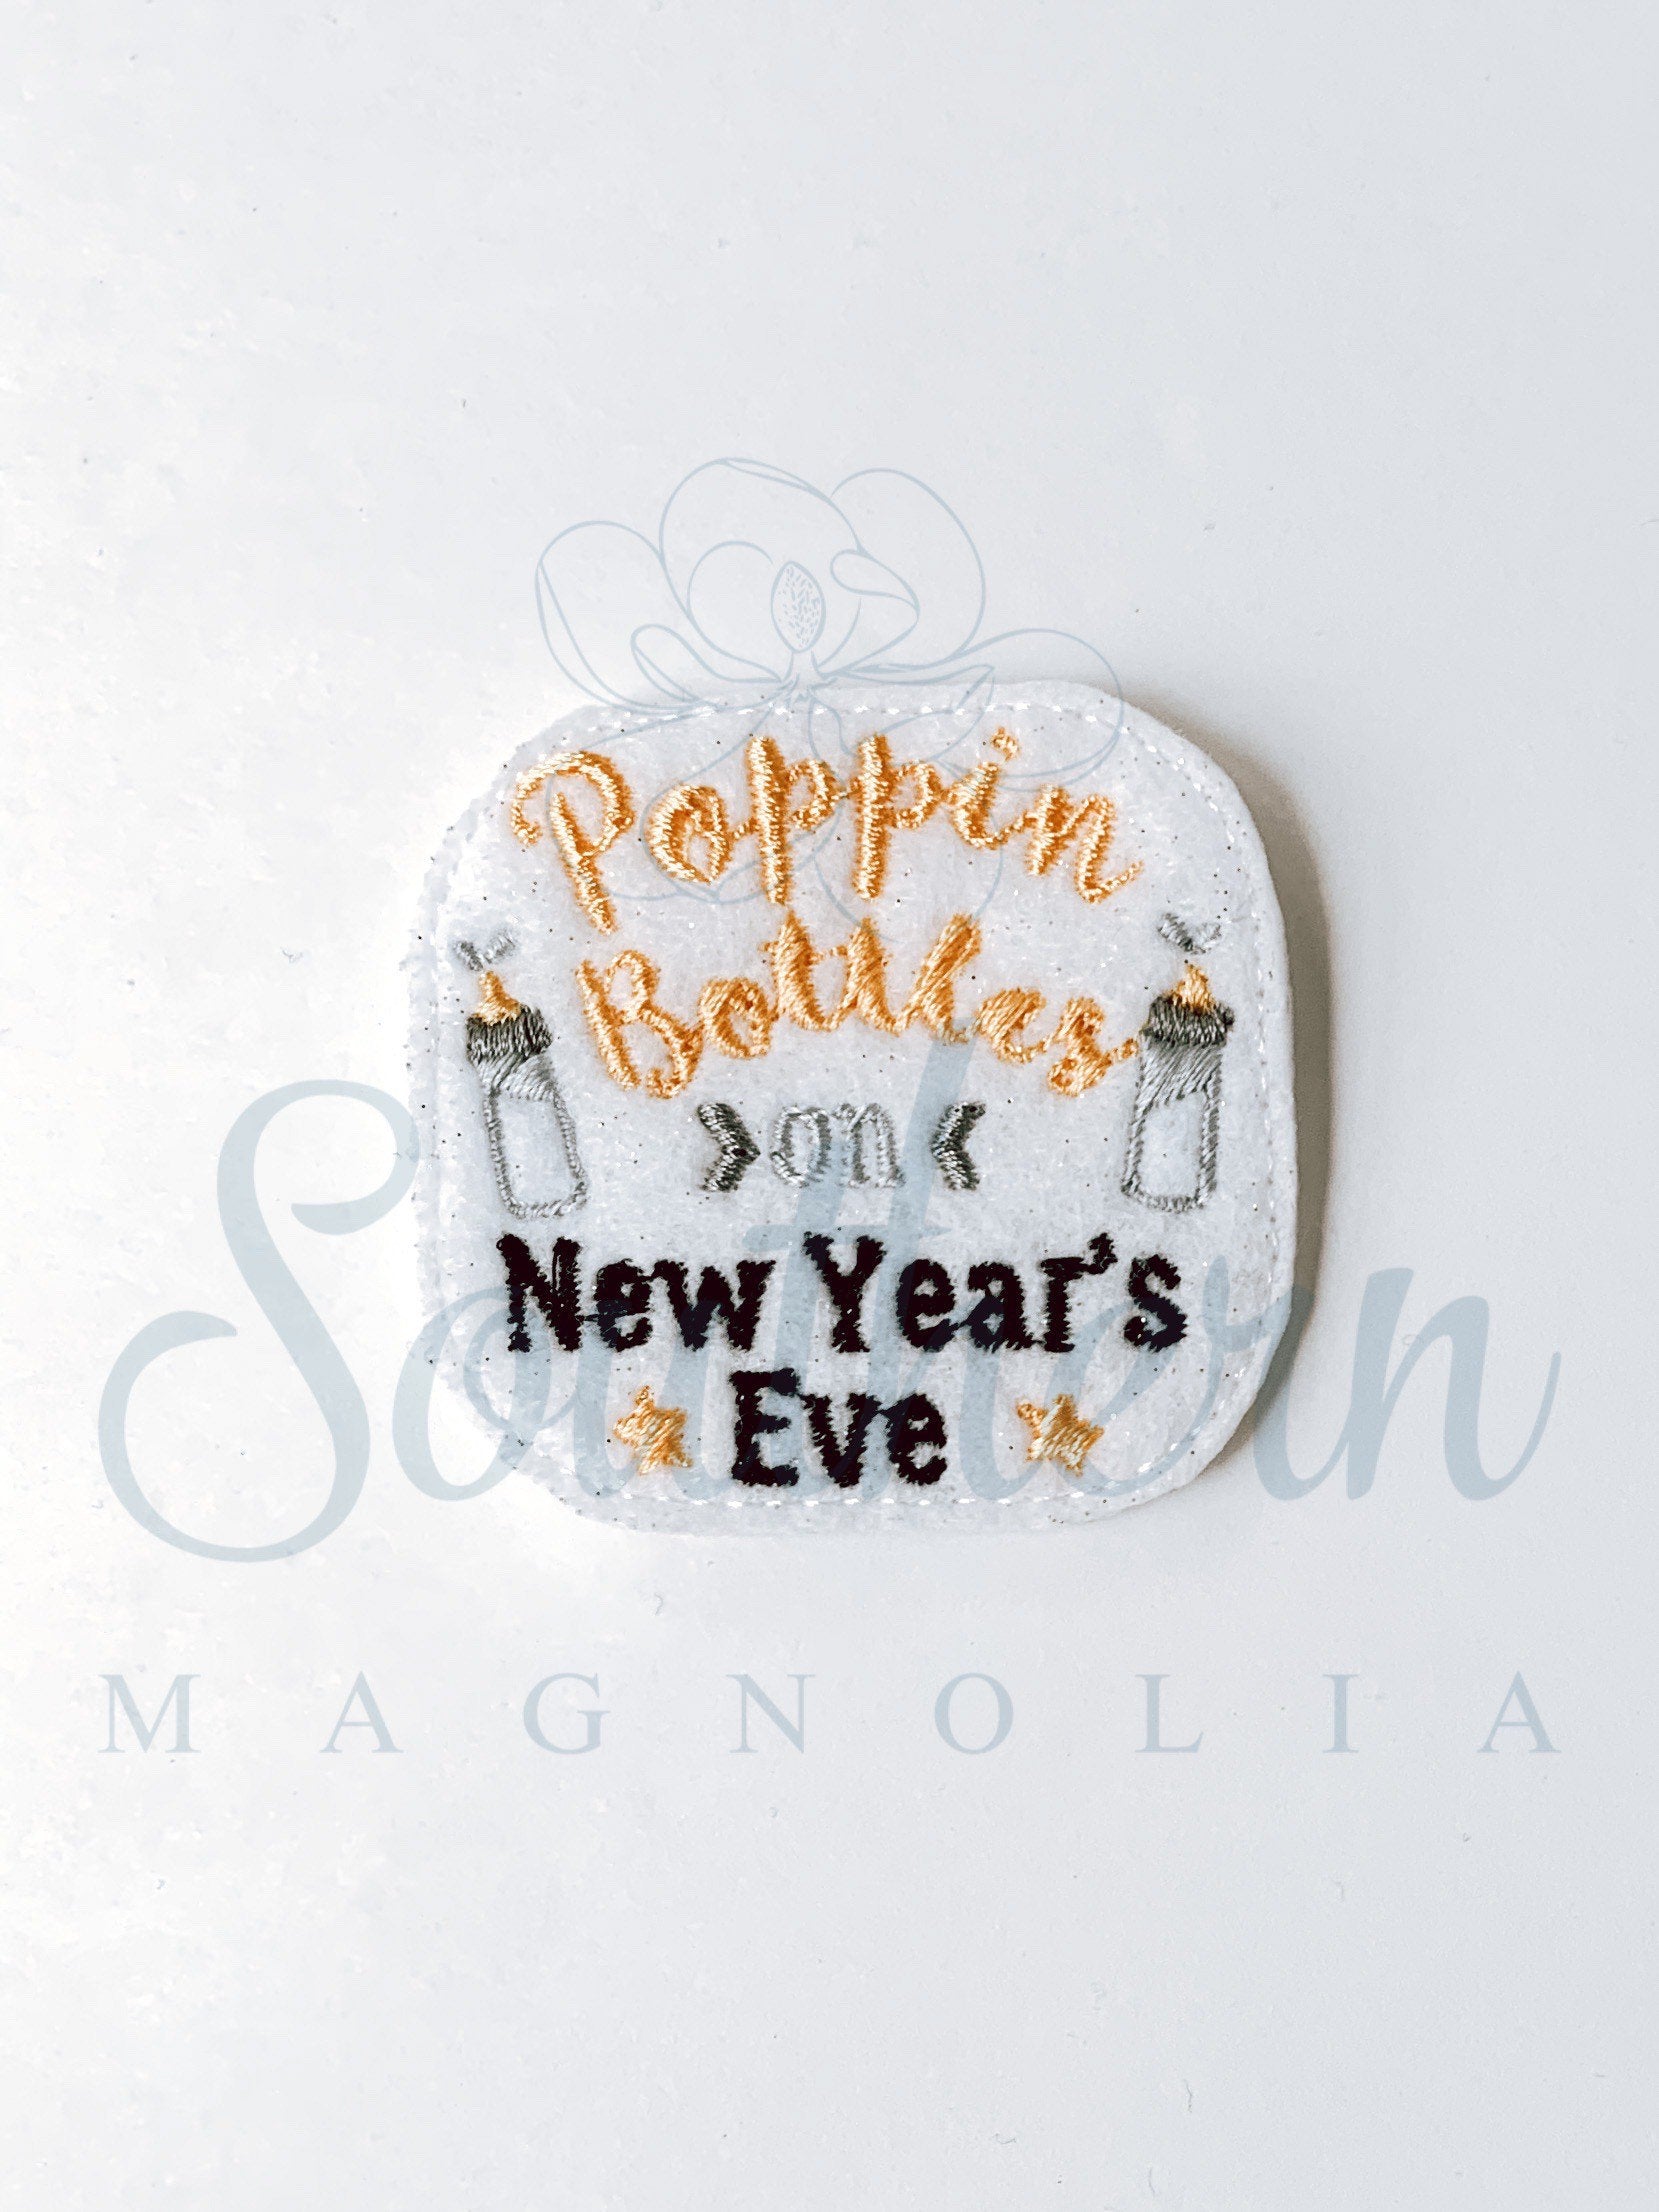 Poppin Bottles on New Year's Eve Feltie Embroidery Design